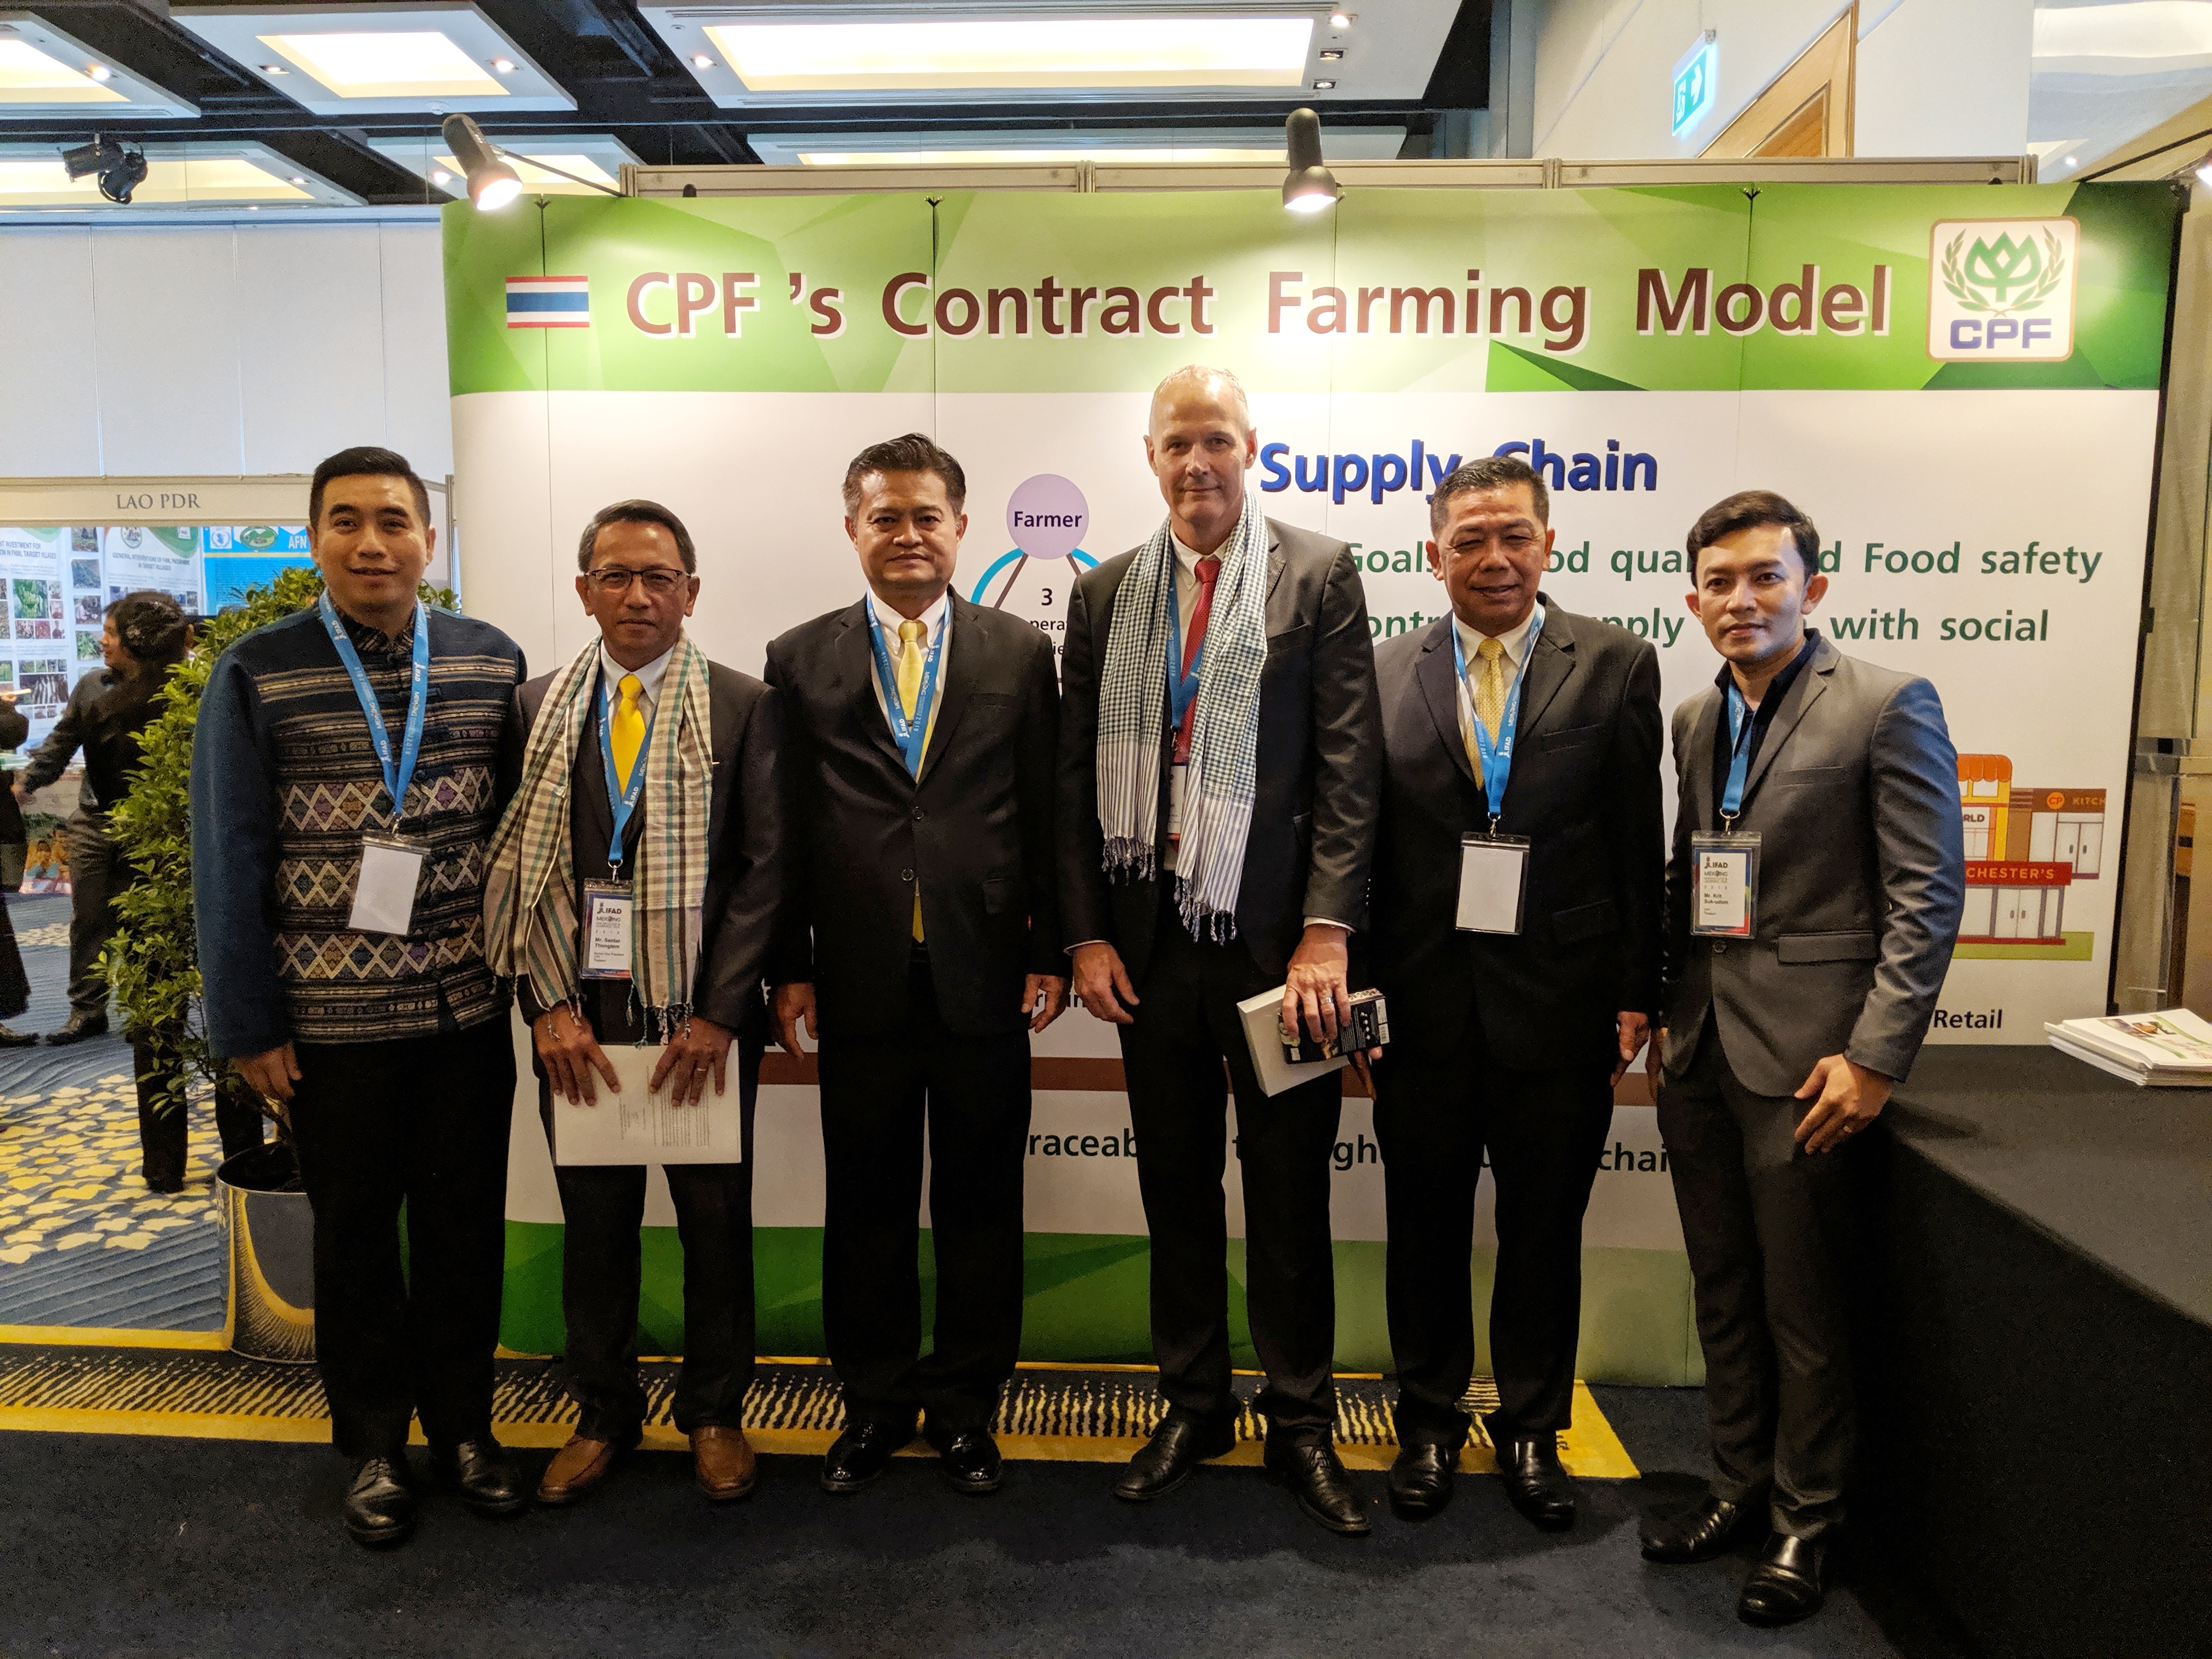 CP Foods’ developed contract farming model to strengthen farmer’s competitiveness